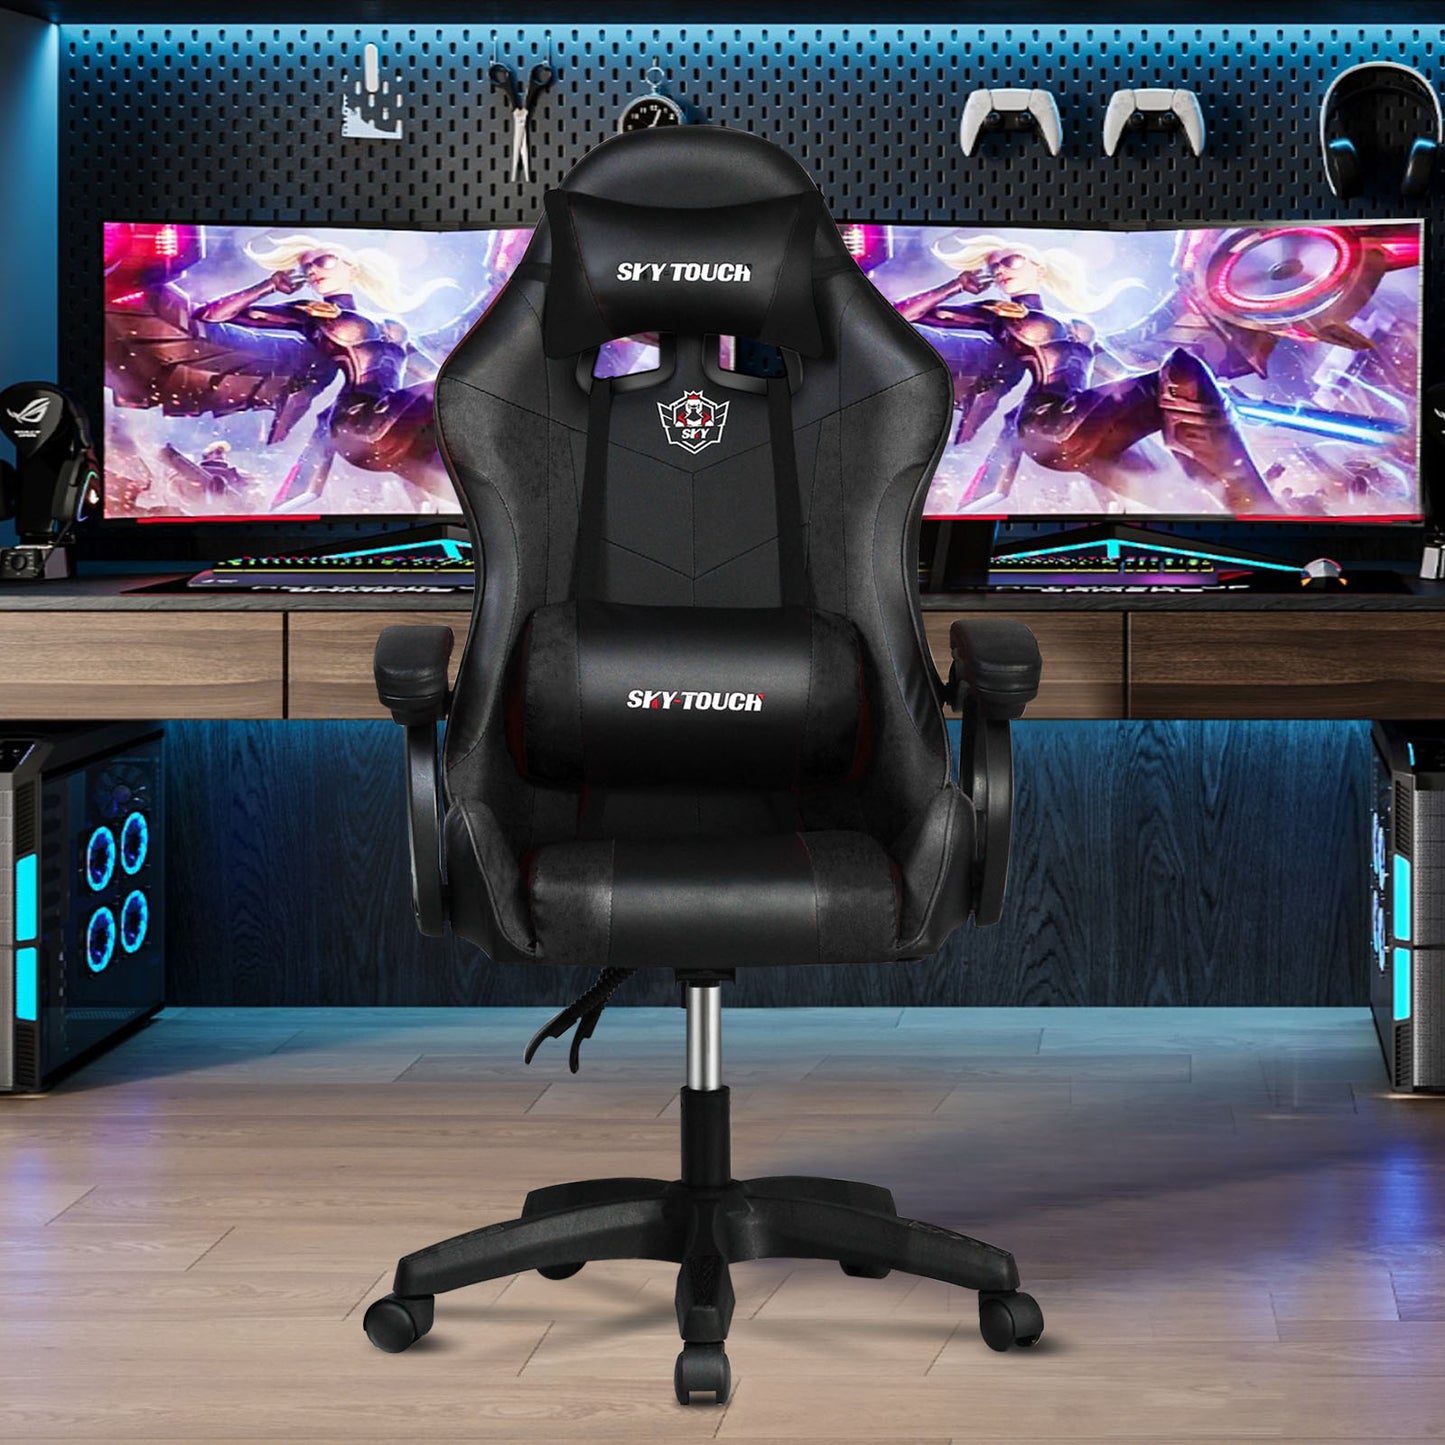 SKY-TOUCH Gaming Chair，Adjustable Computer Chair Pc Office Pu Leather High Back, Ergonomic design Lumbar Support,Comfortable Armrest Headrest